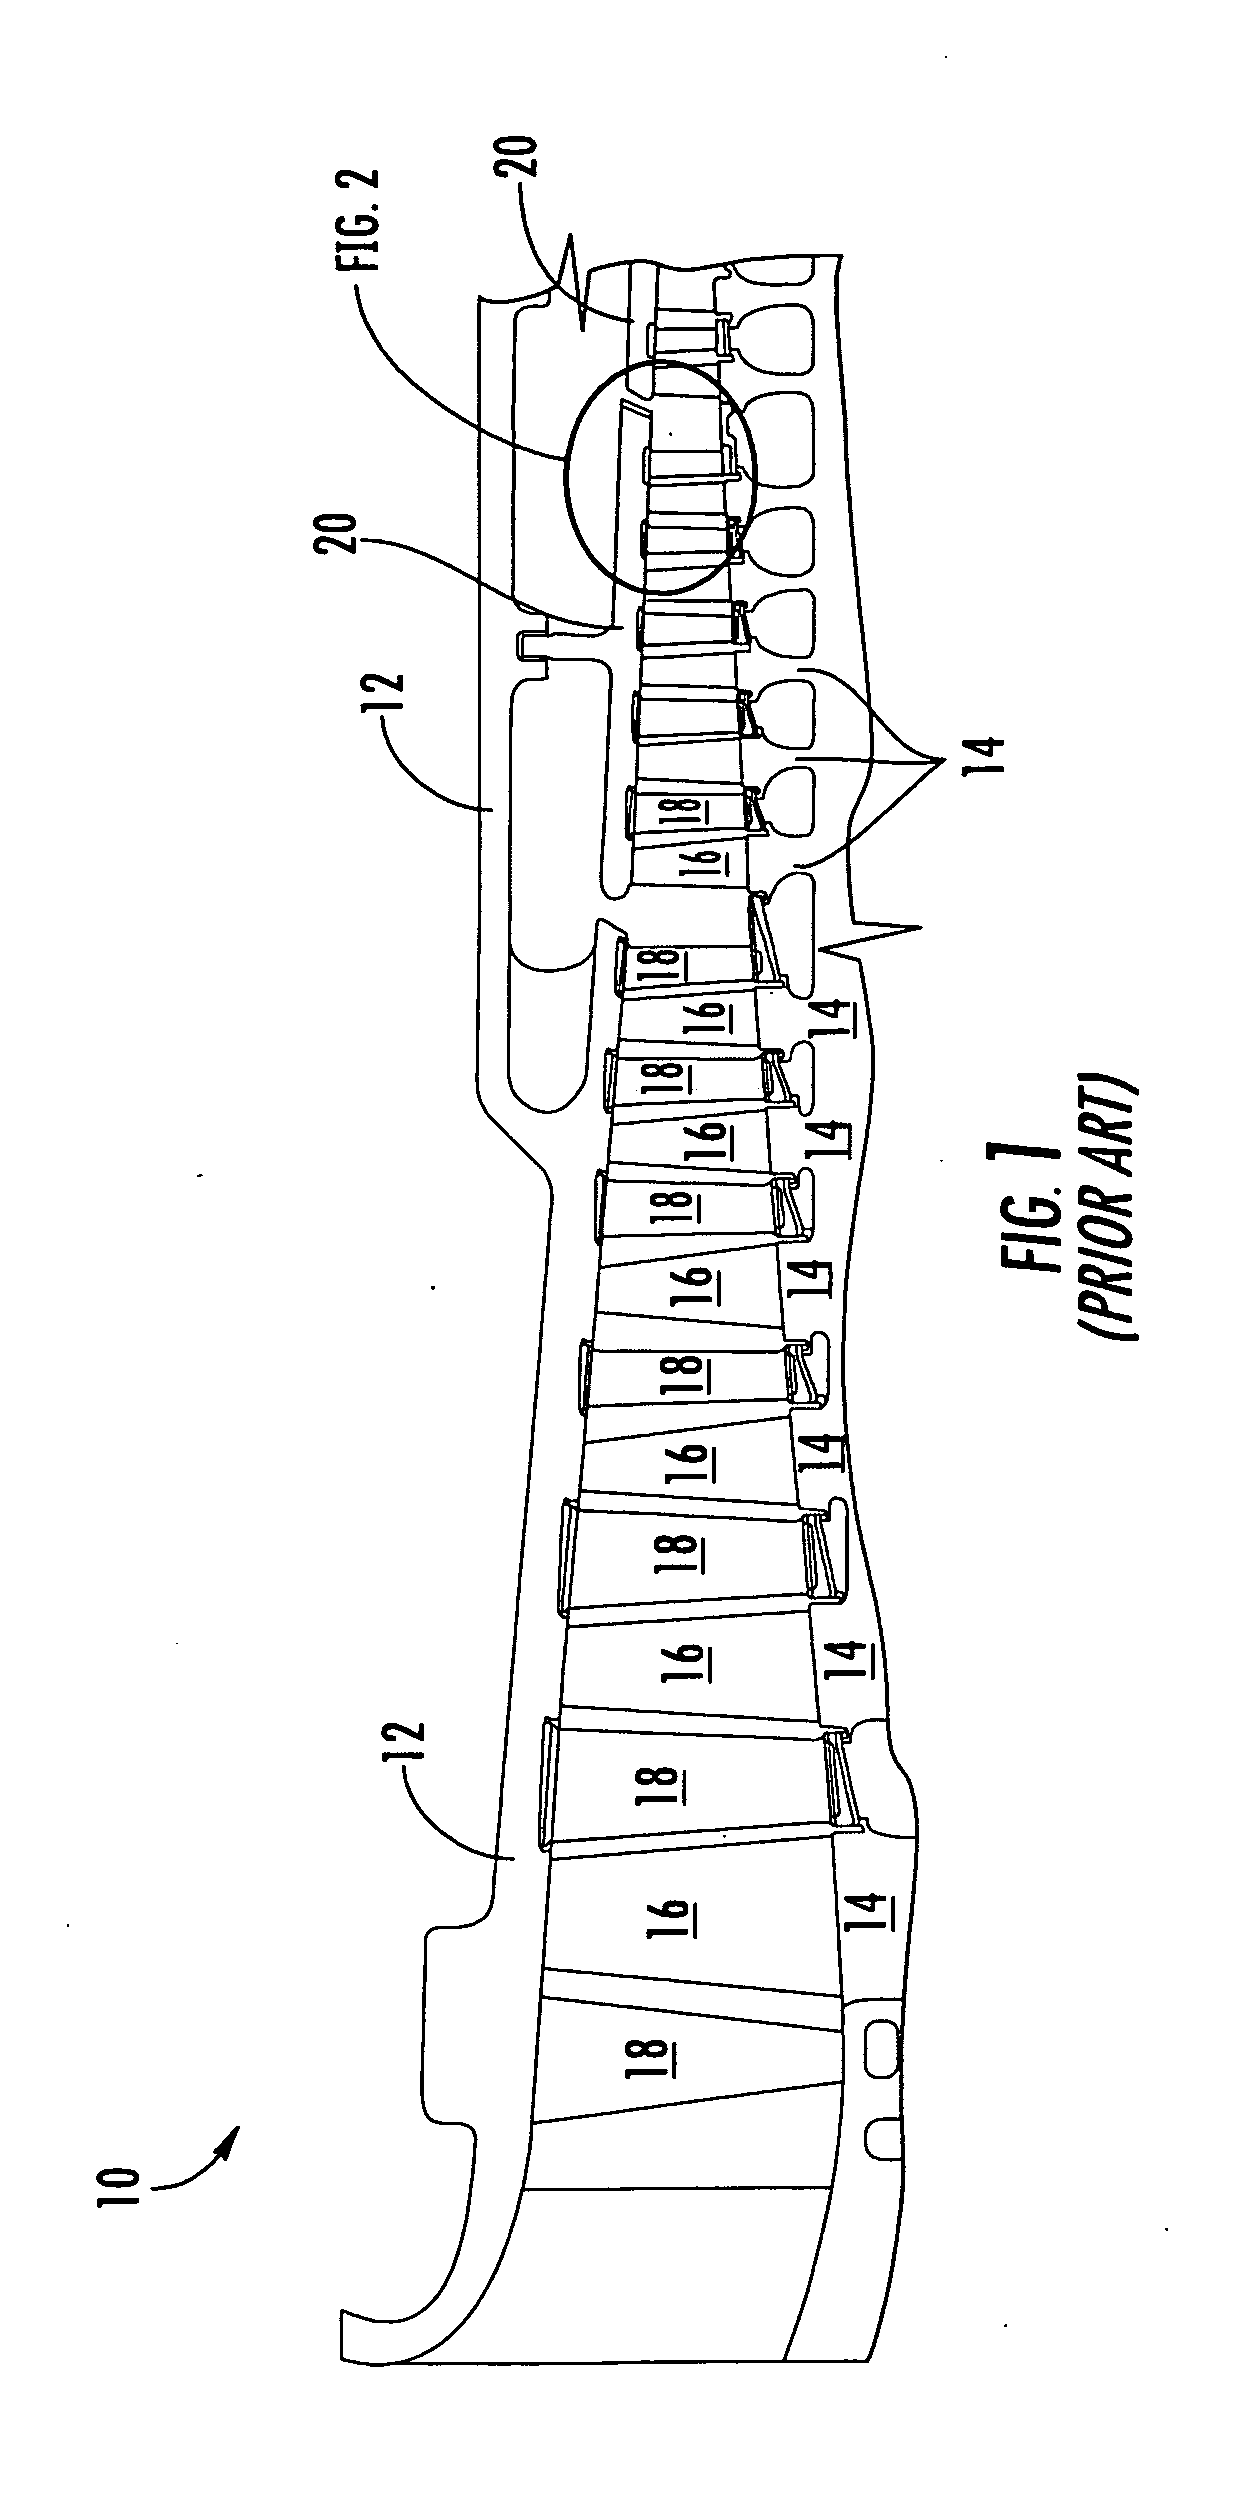 System for actively controlling compressor clearances